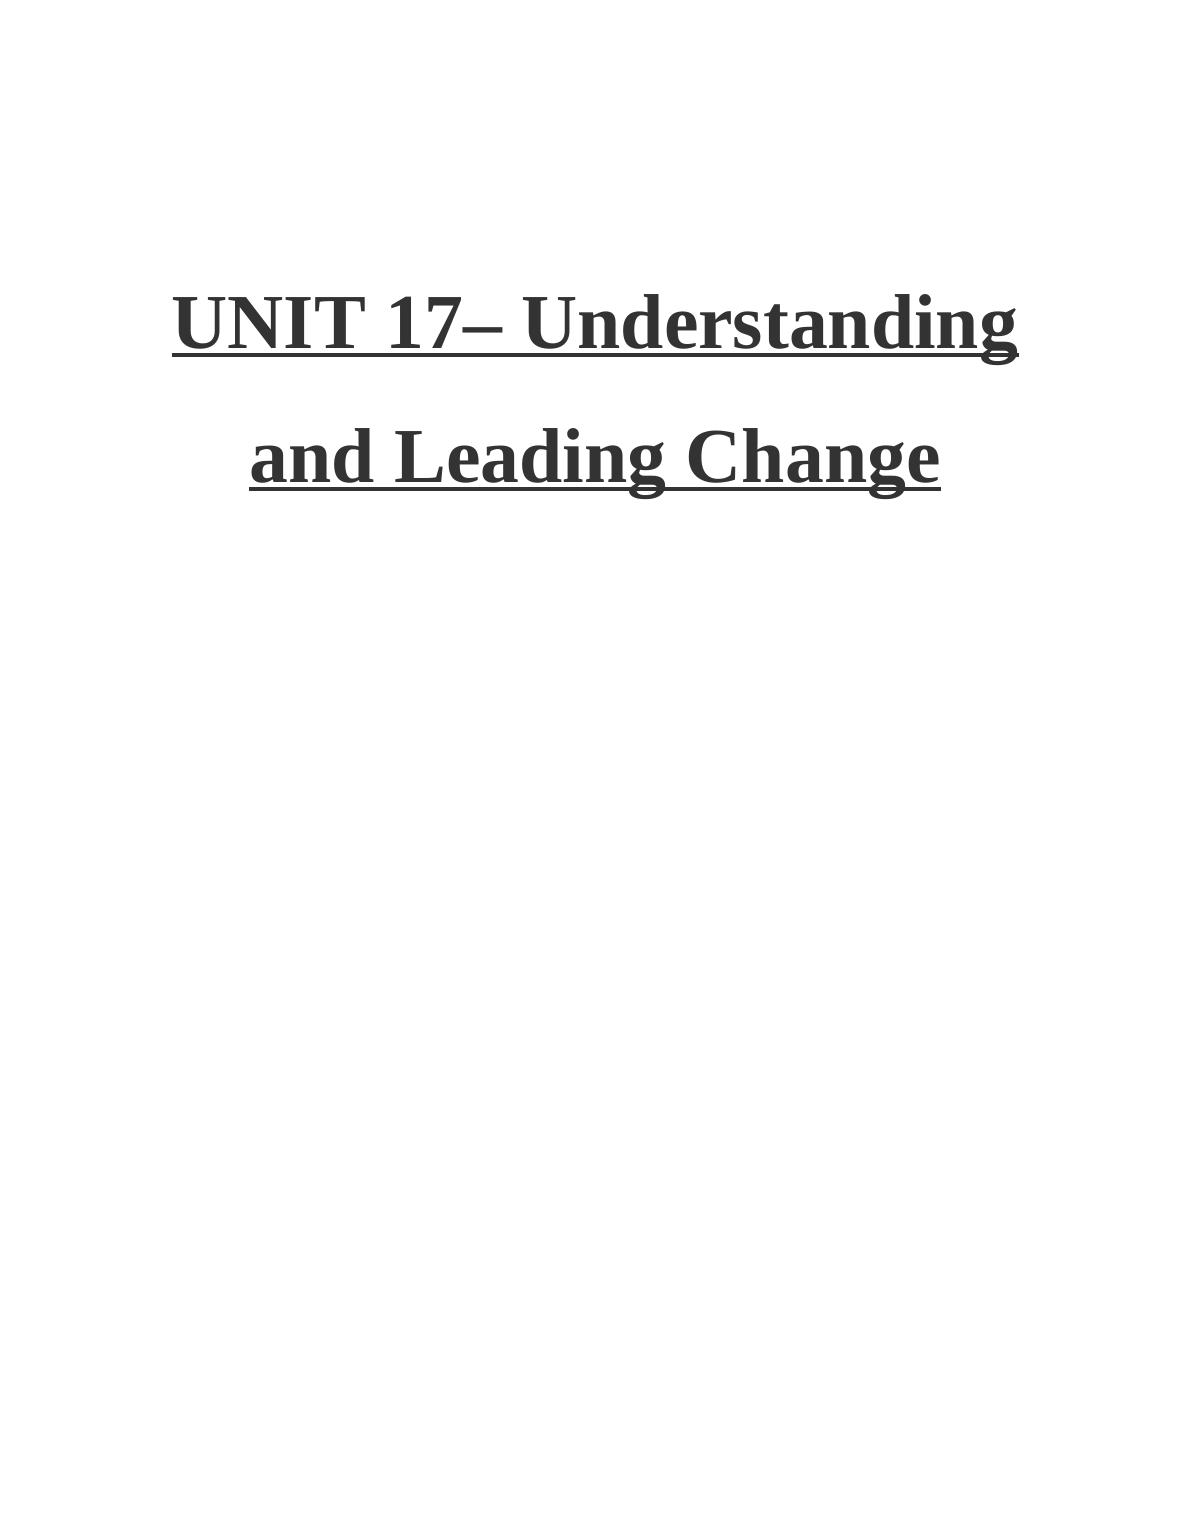 UNIT 17– Understanding and Leading Change_1